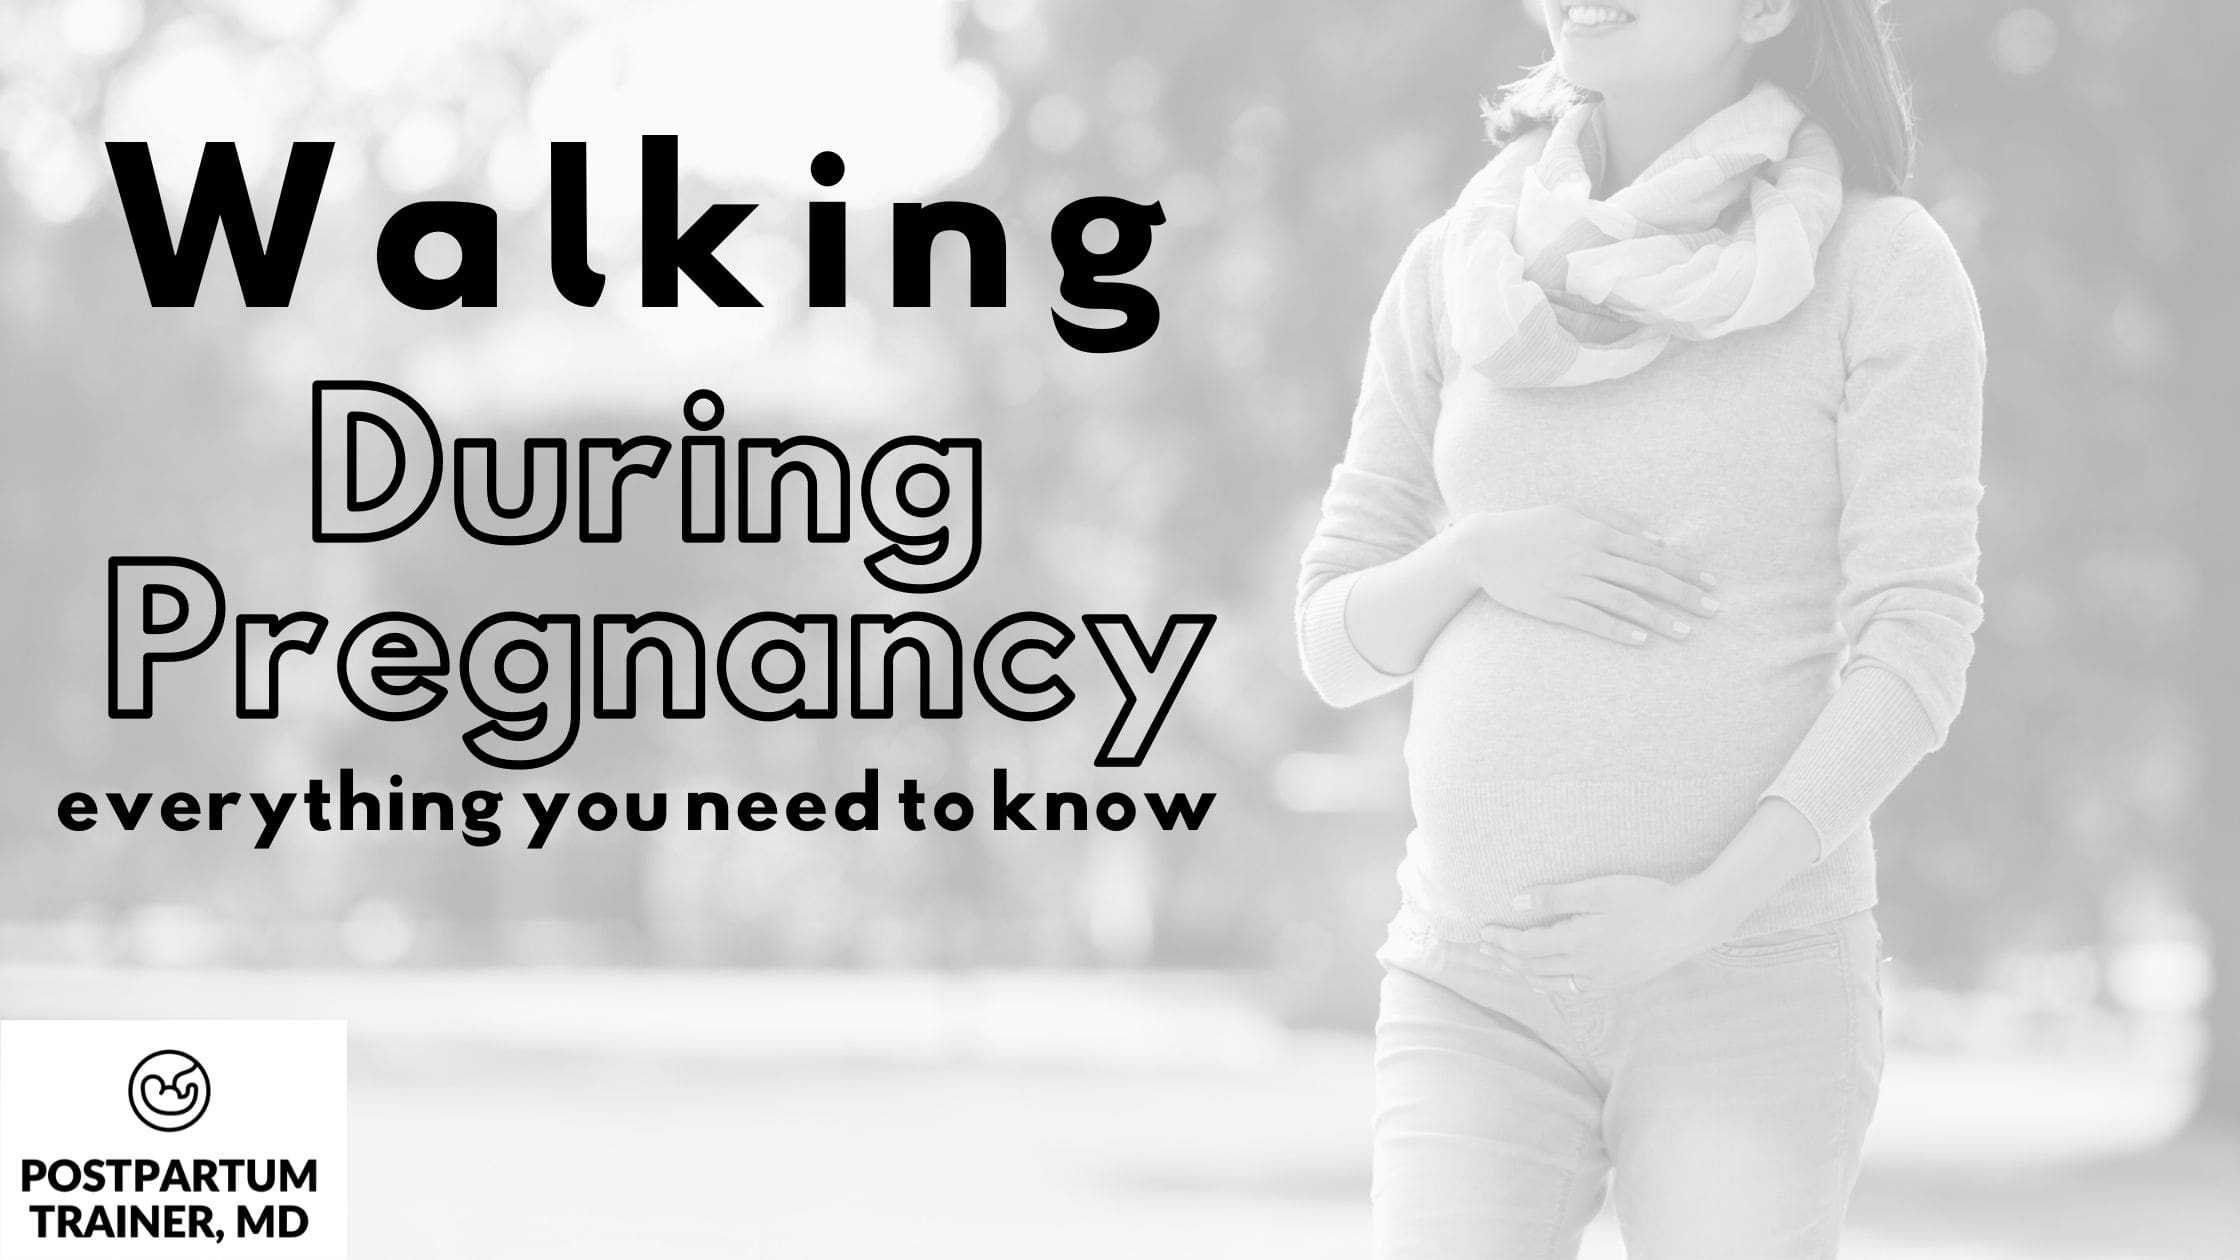 When To Start Walking During Pregnancy [What You Need To Know